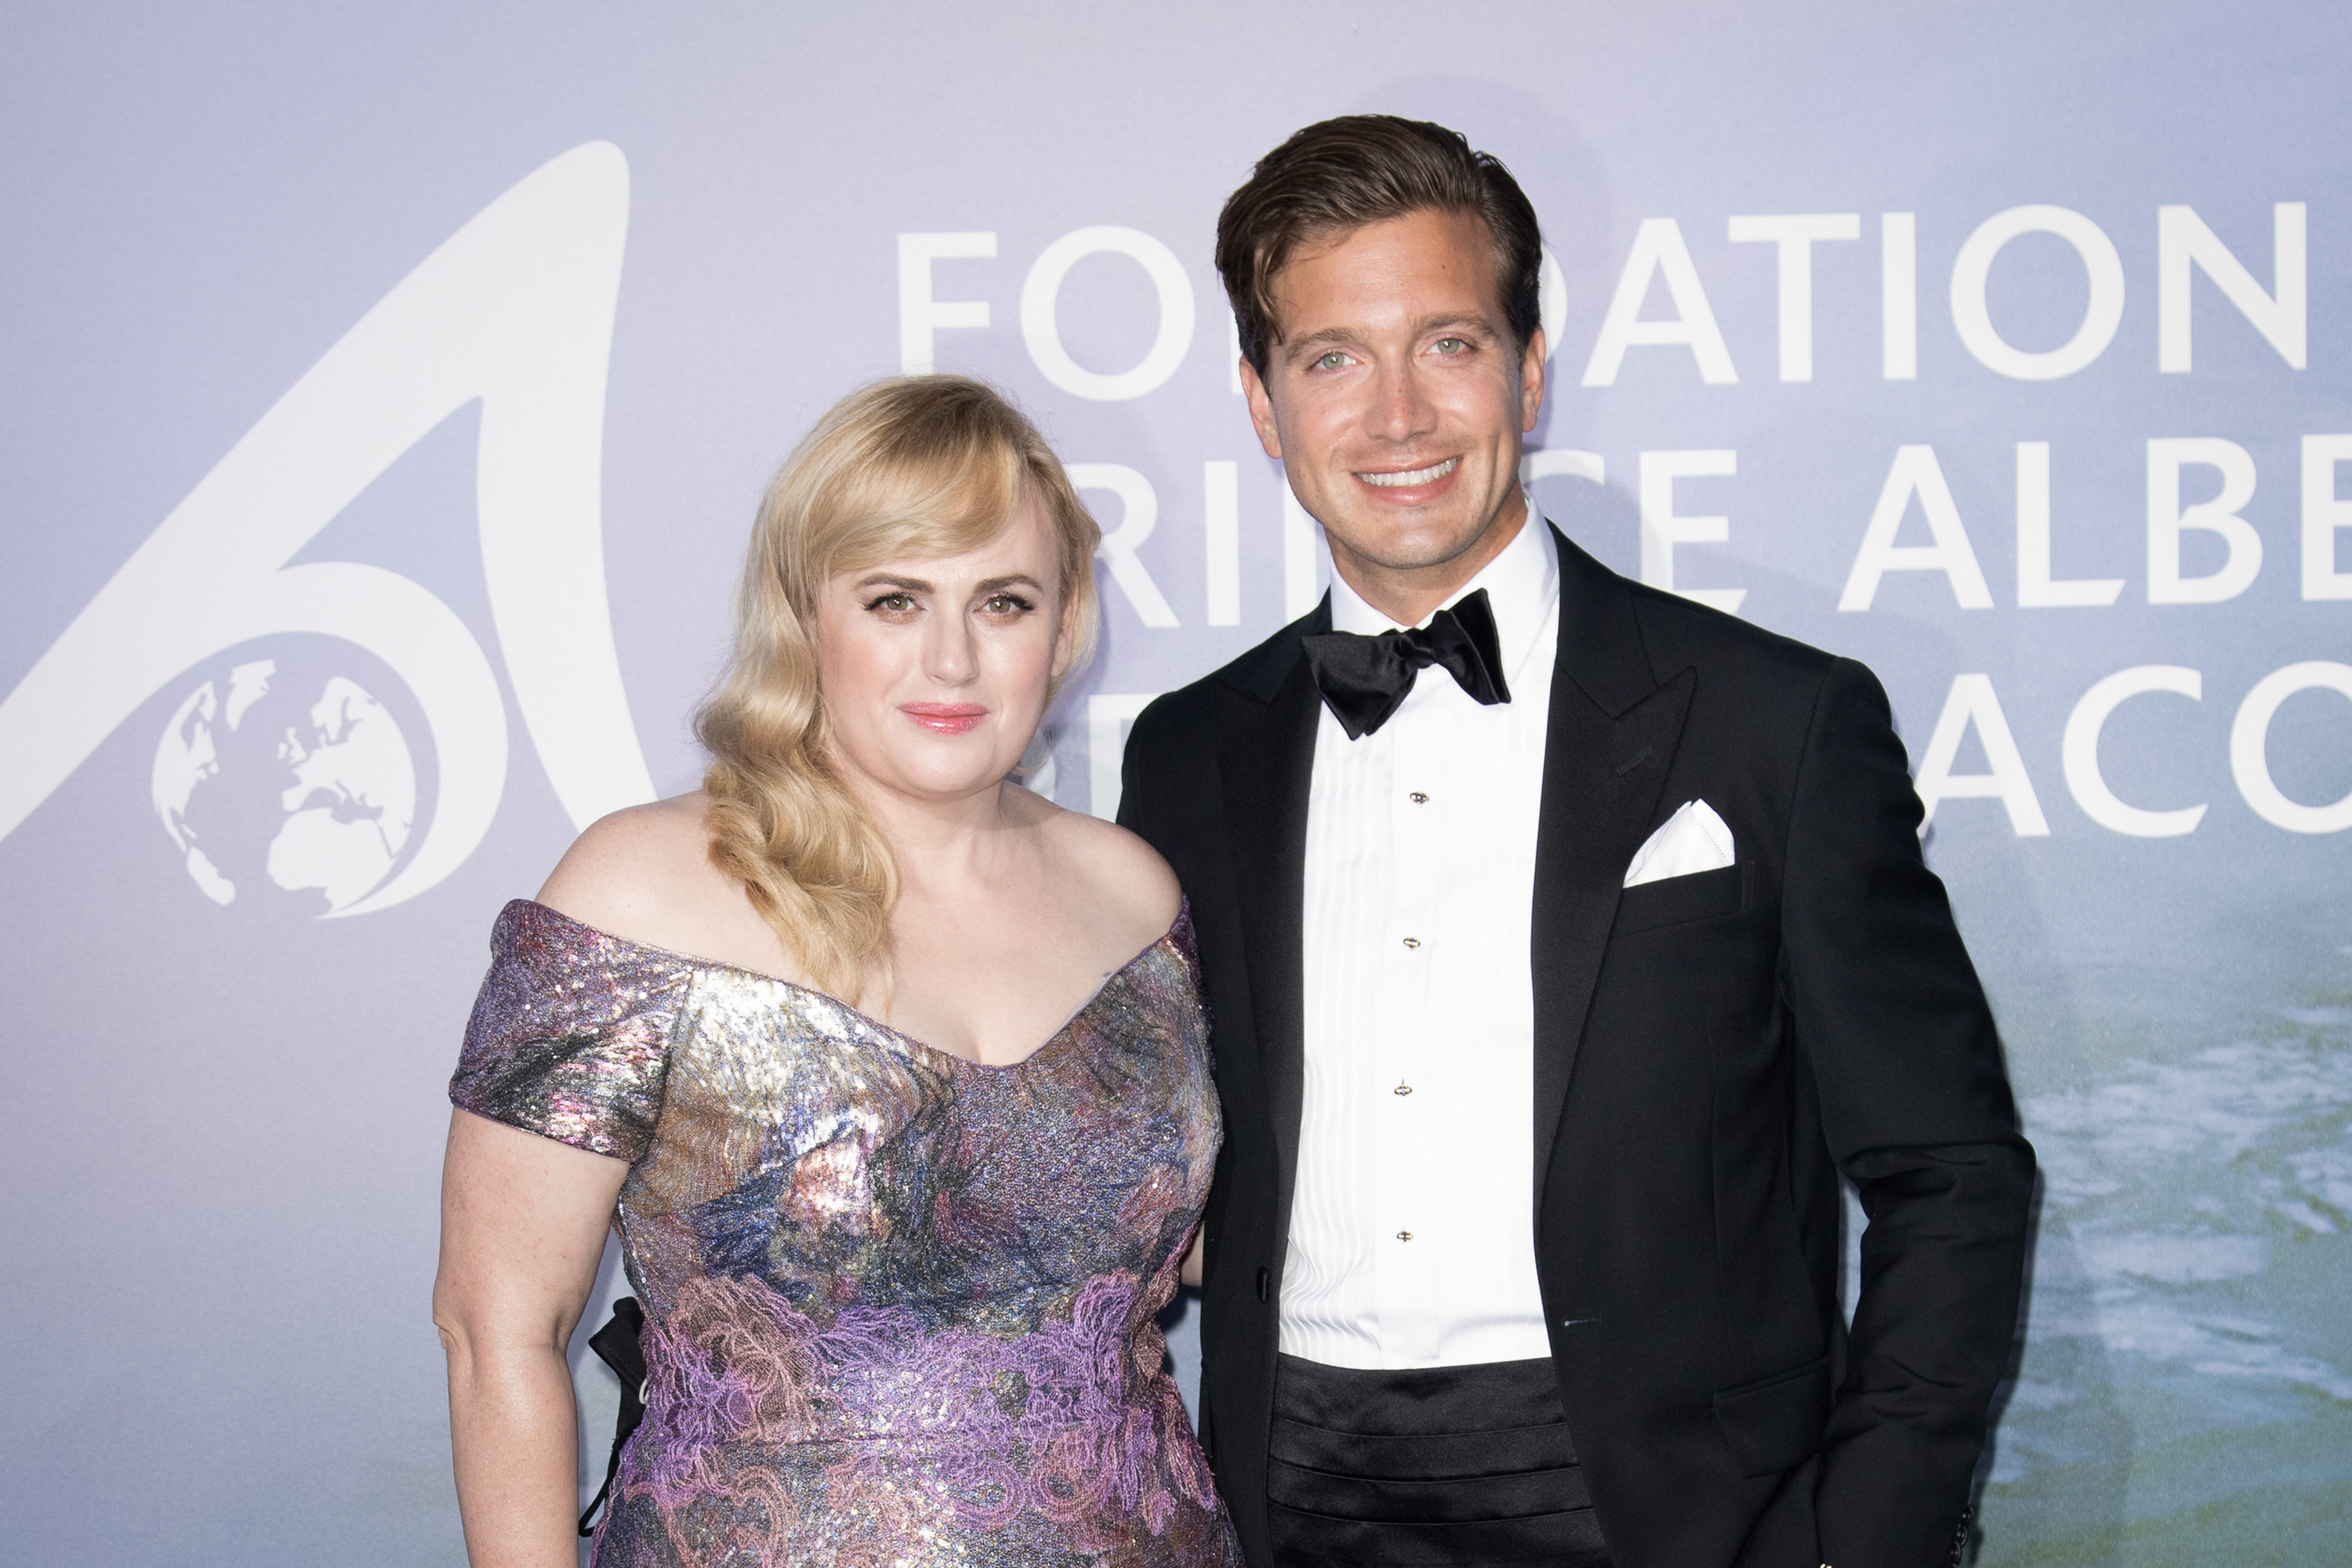 Rebel Wilson and Jacob Busch attend the Monte-Carlo Gala For Planetary Health on September 24, 2020 in Monte-Carlo, Monaco.